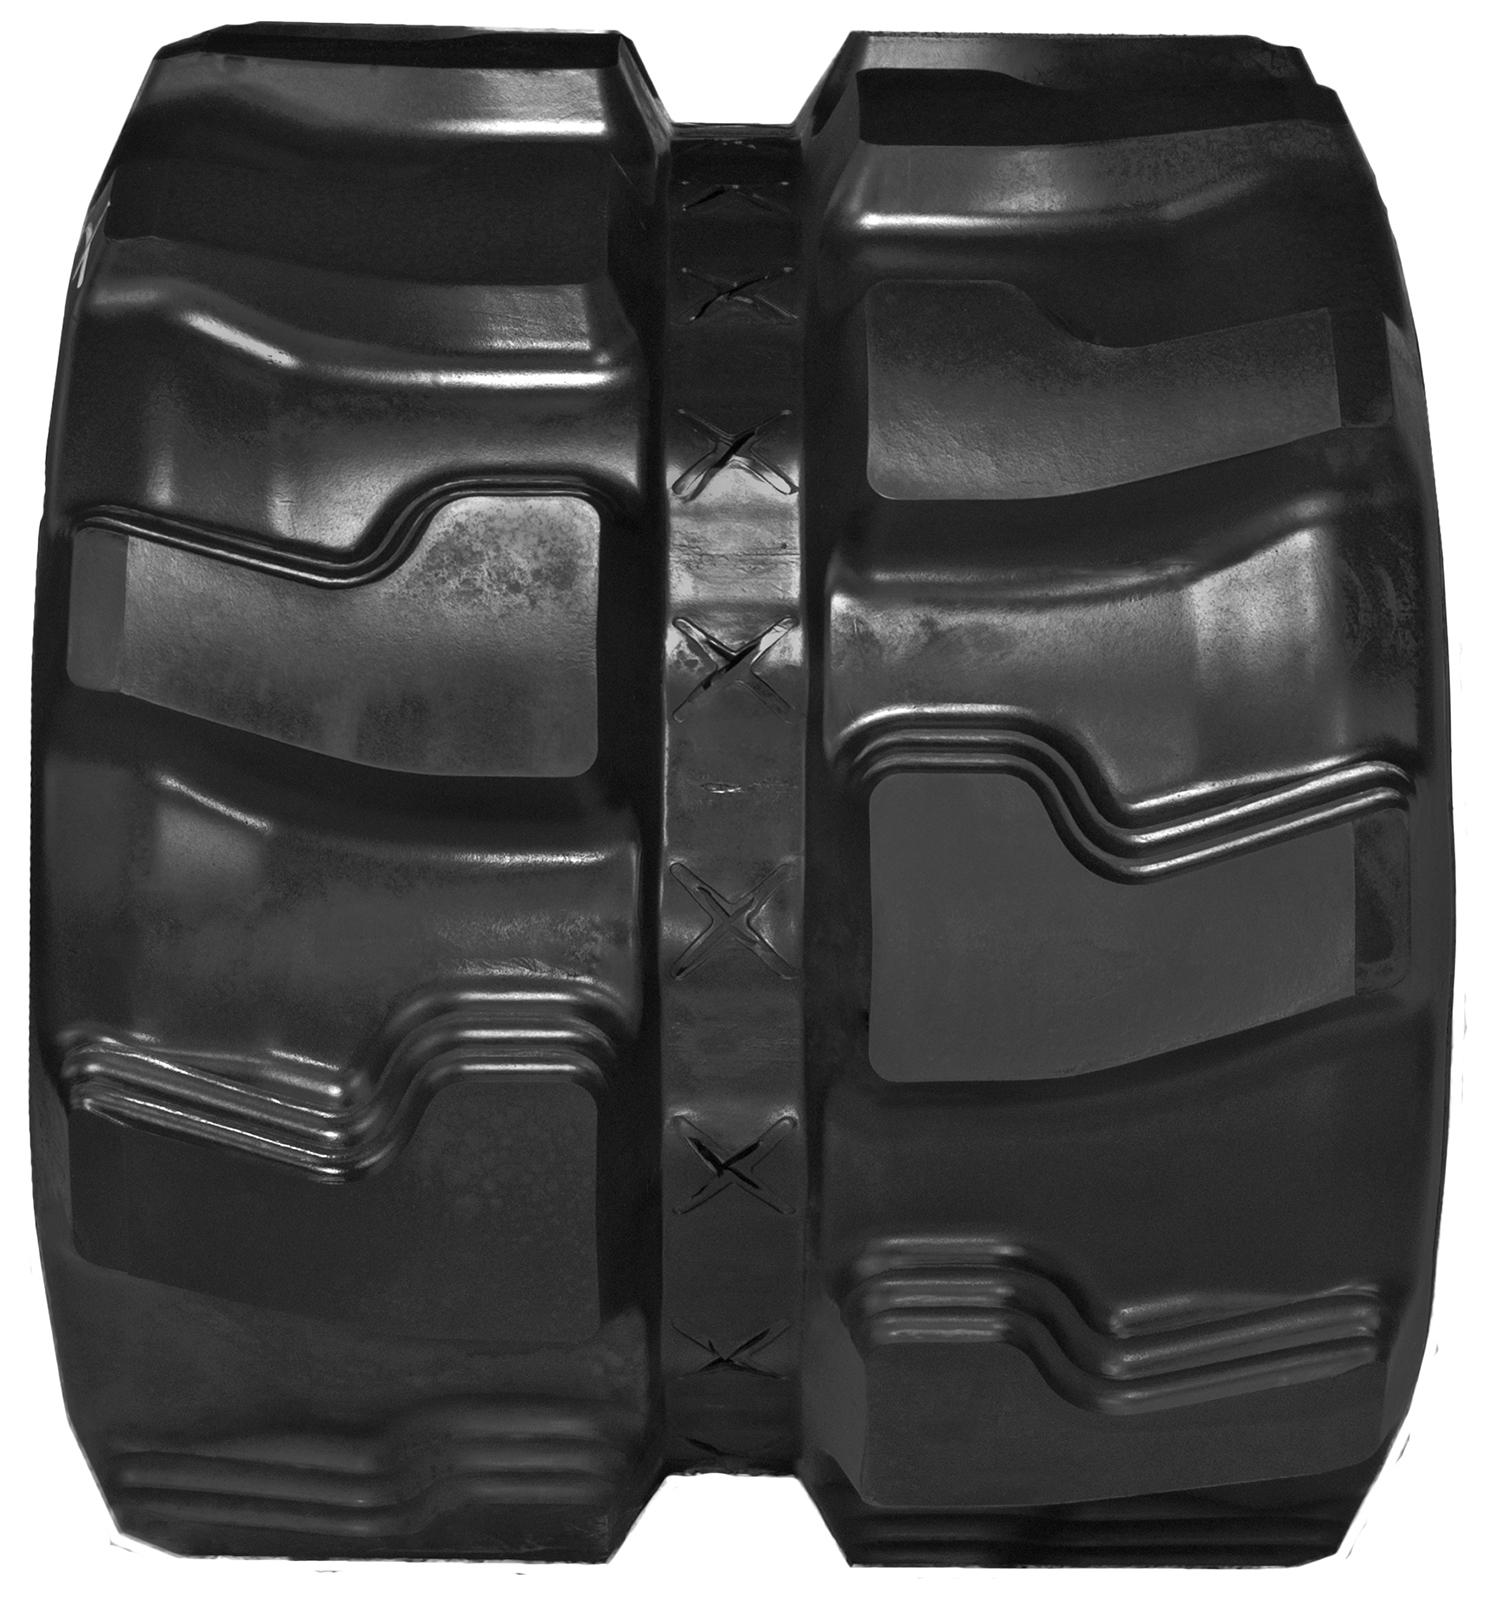 set of 2 16" camso heavy duty rubber track (400x72.5kx70)